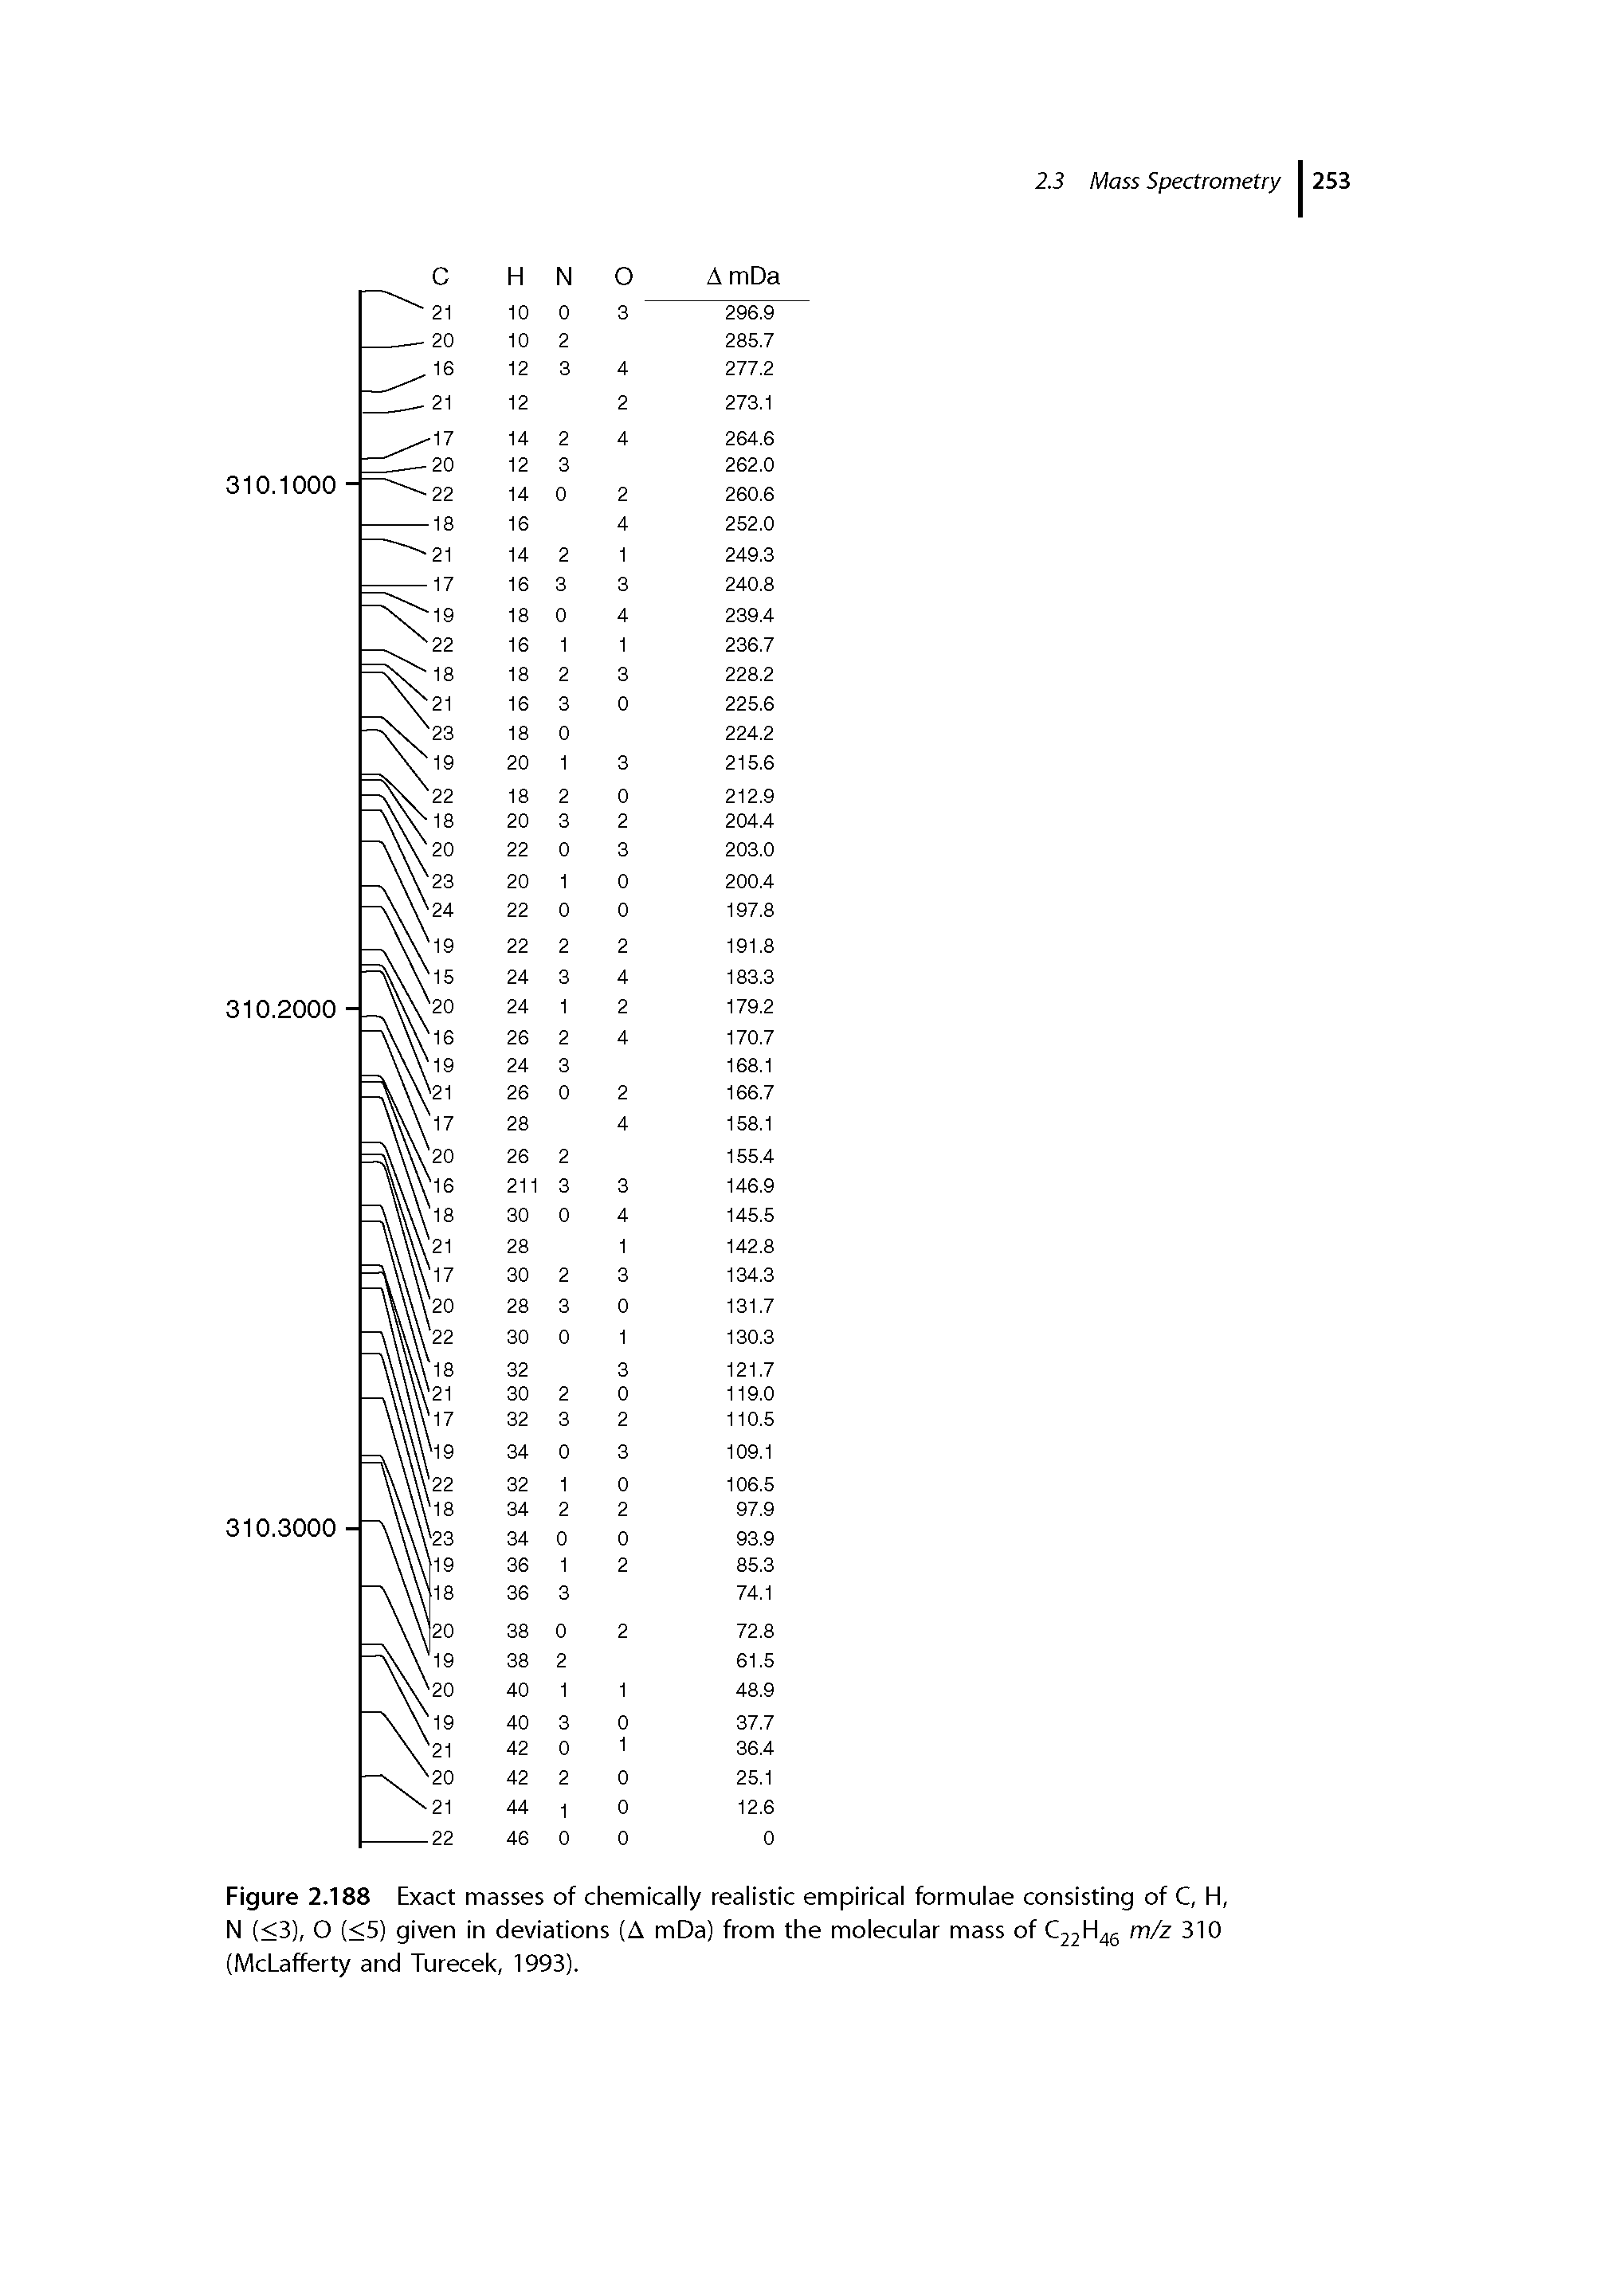 Figure 2.188 Exact masses of chemically realistic empirical formulae consisting of C, H, N (<3), O (<5) given in deviations (A mDa) from the molecular mass of C22H45 m/z 310 (McLafferty and Turecek, 1993).